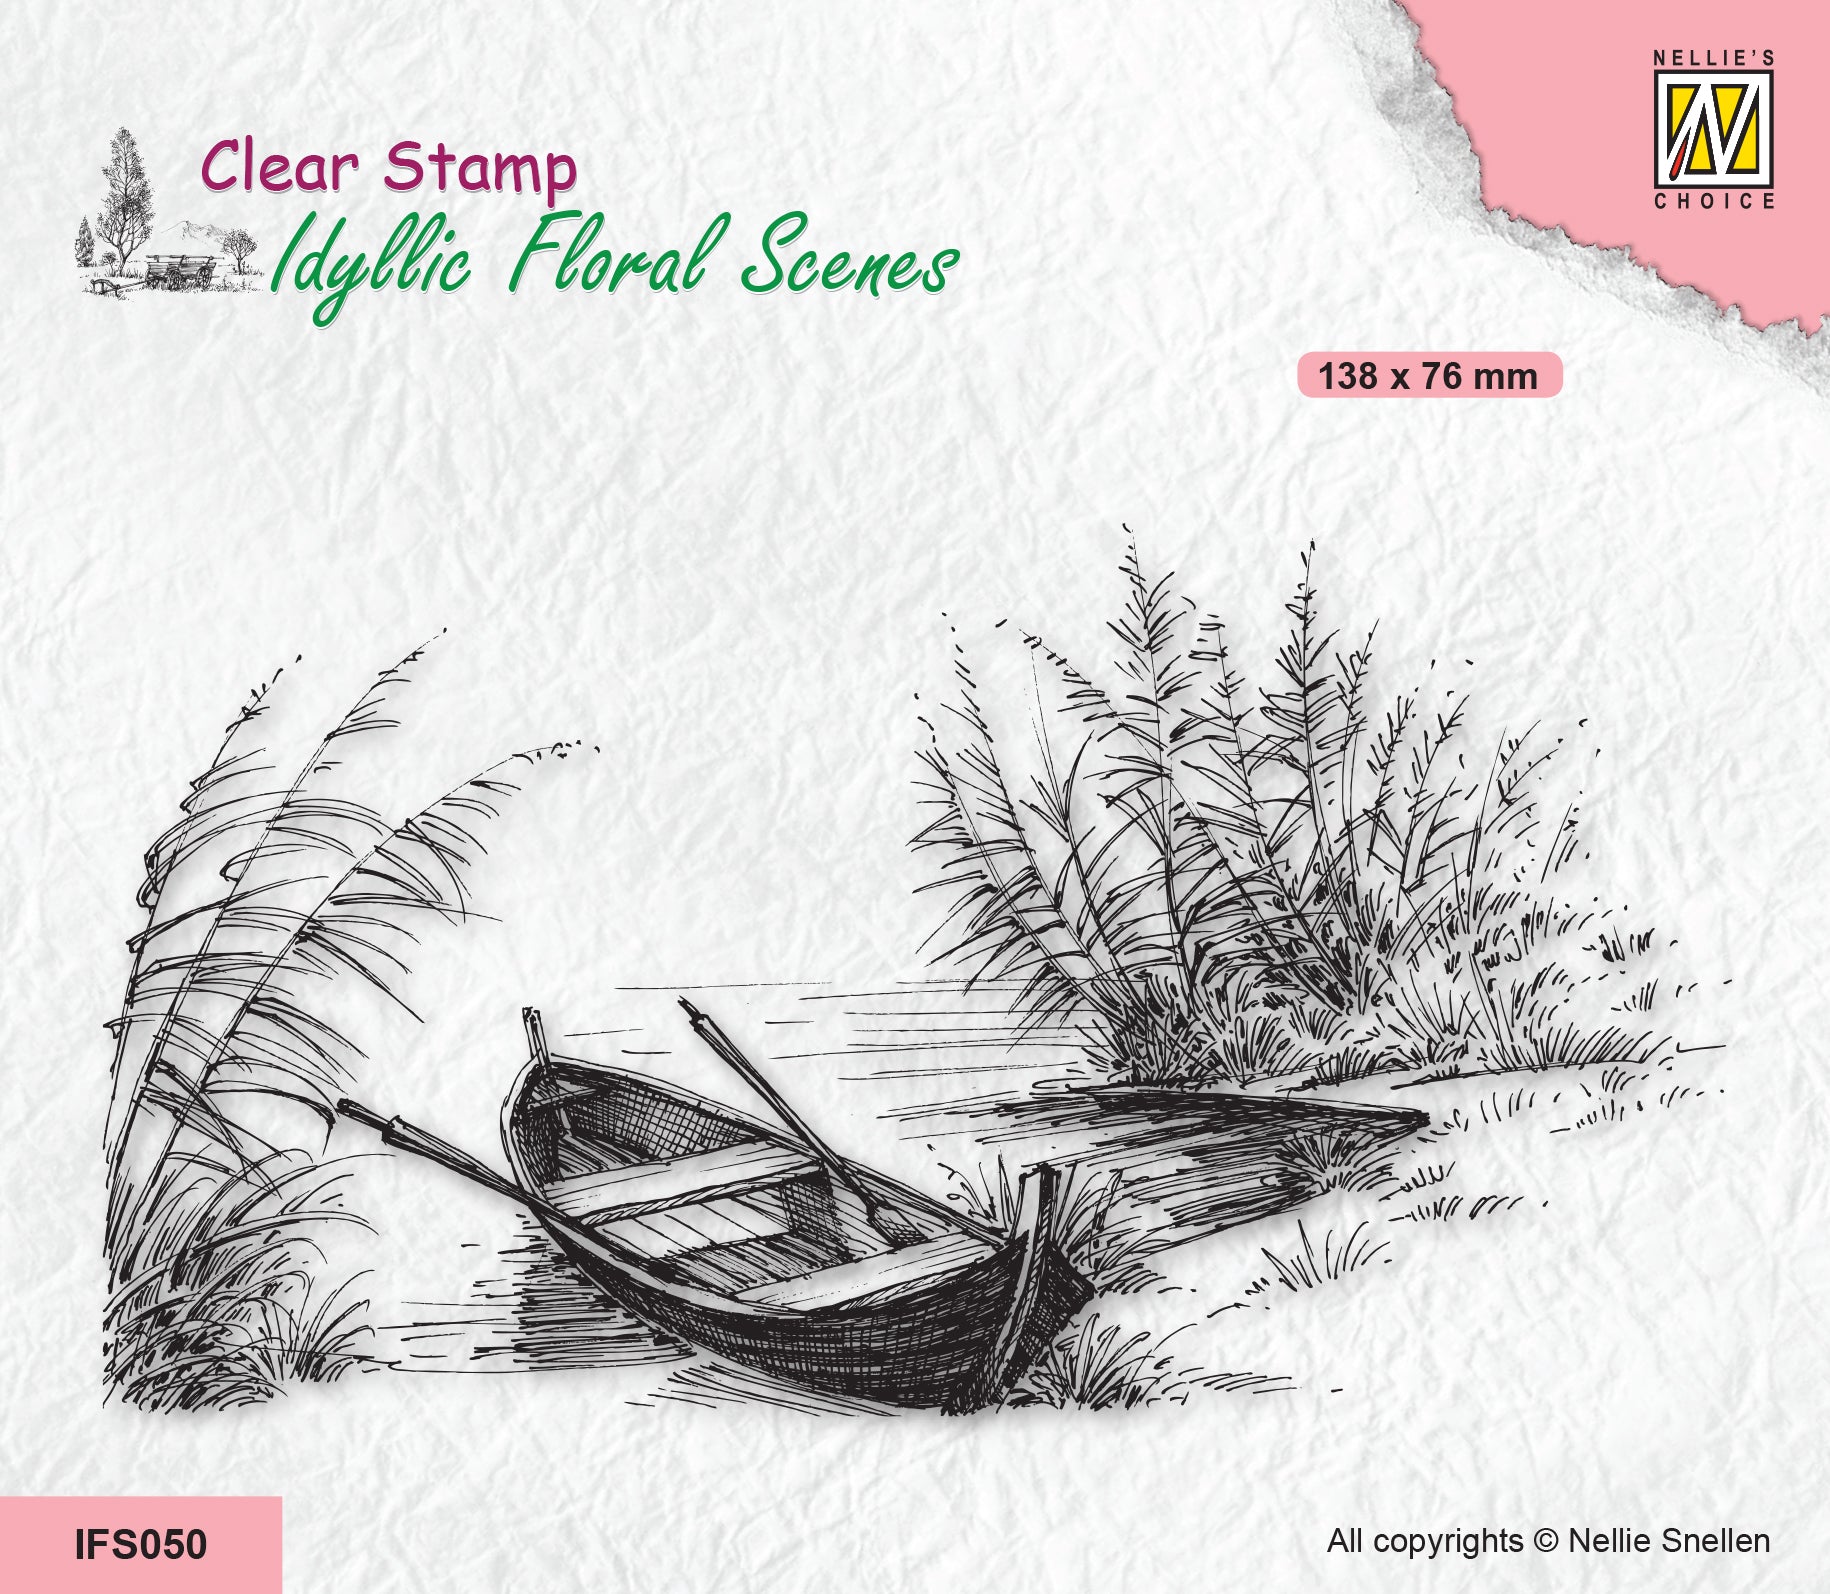 Nellie's Choice Clear Stamp Idyllic Floral Scene - Lake With Rowing Boat